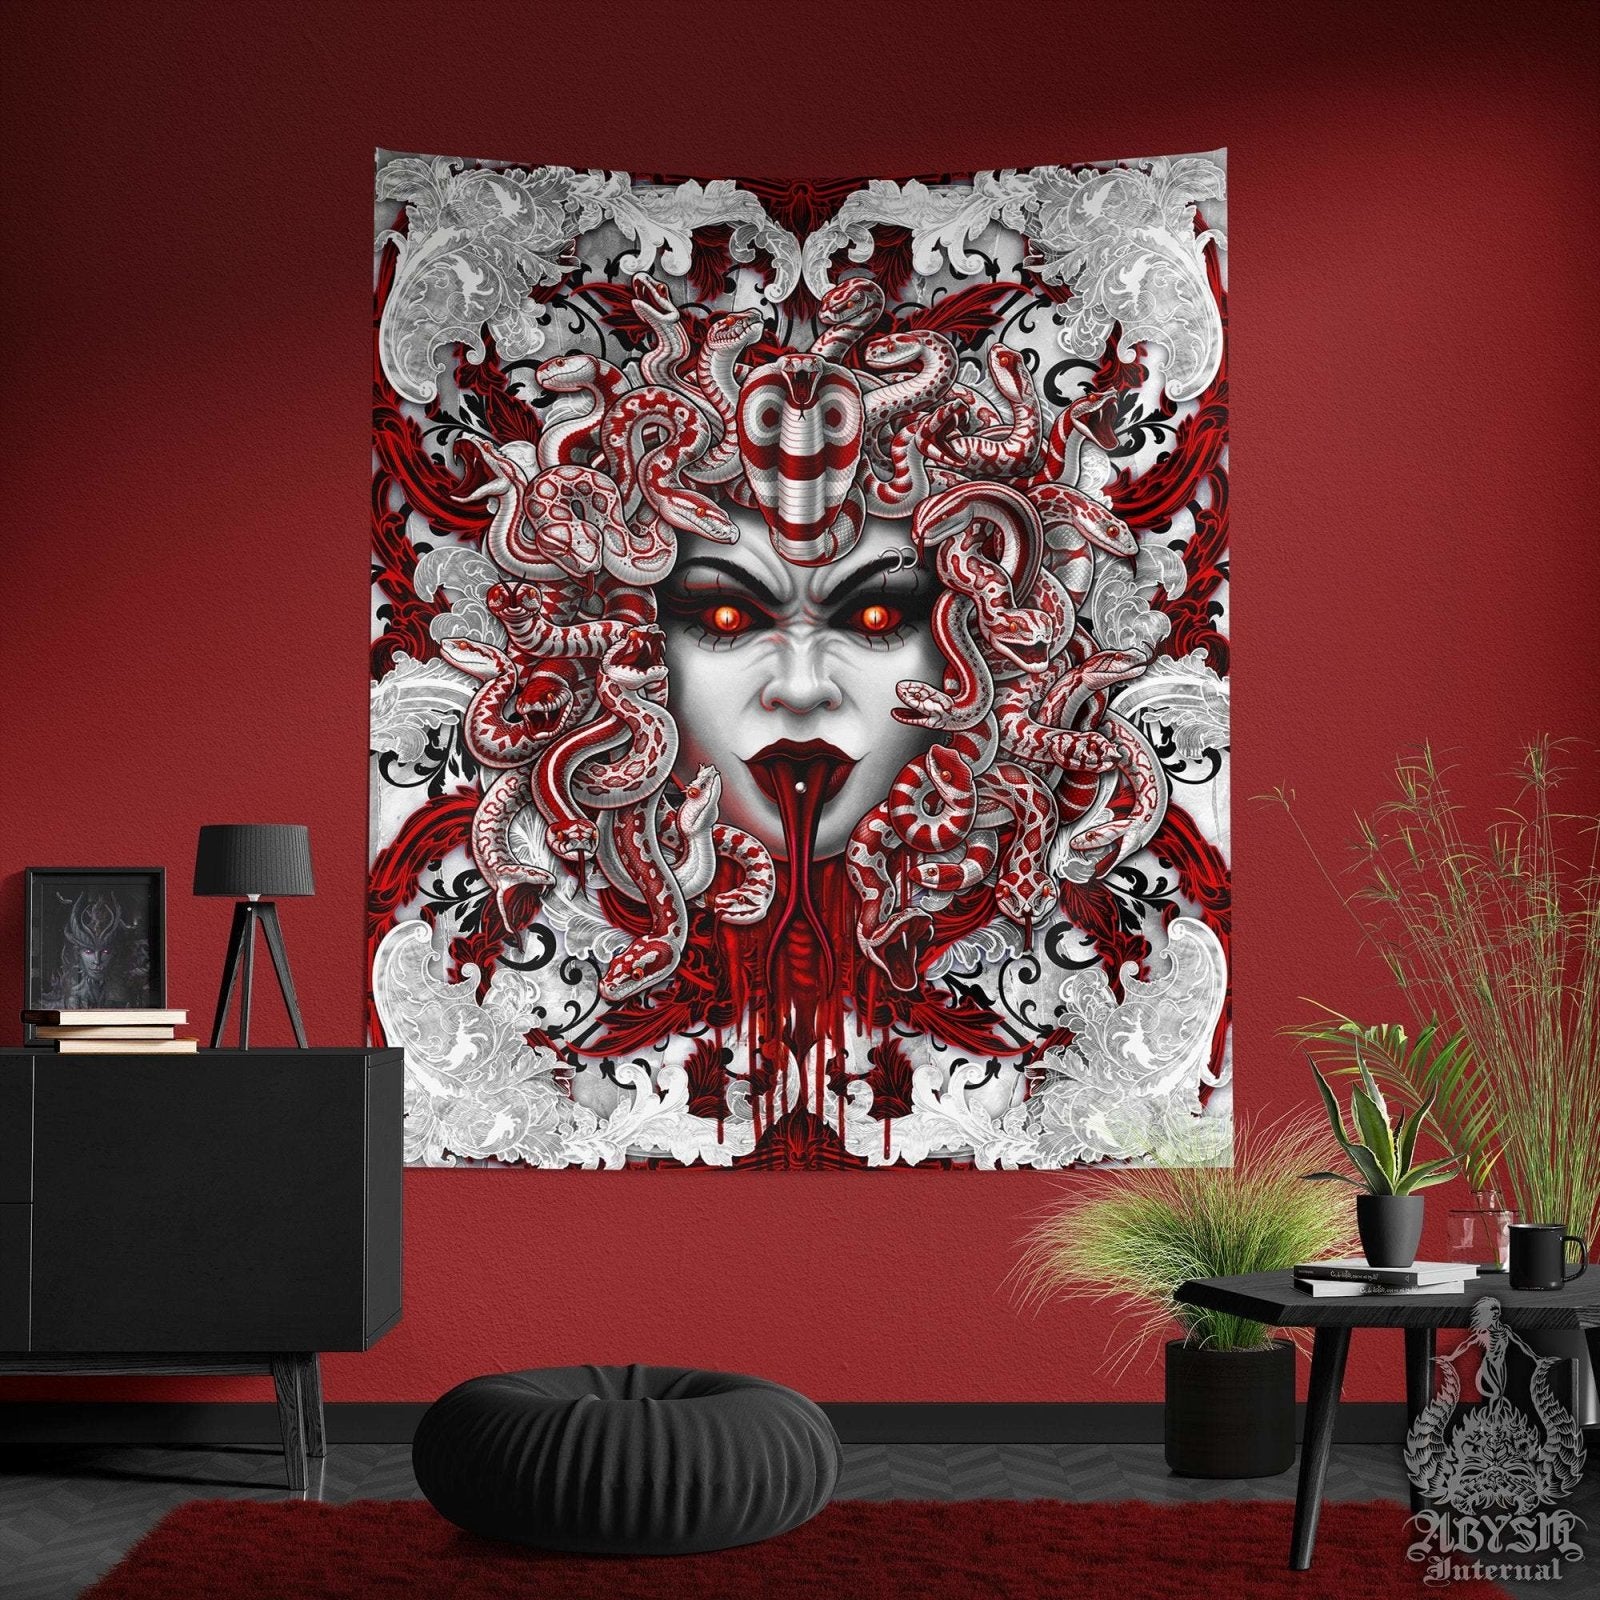 Gothic Tapestry, White Goth Wall Hanging, Horror Home Decor, Art Print - Medusa & Snakes, 3 Faces, Bloody - Abysm Internal